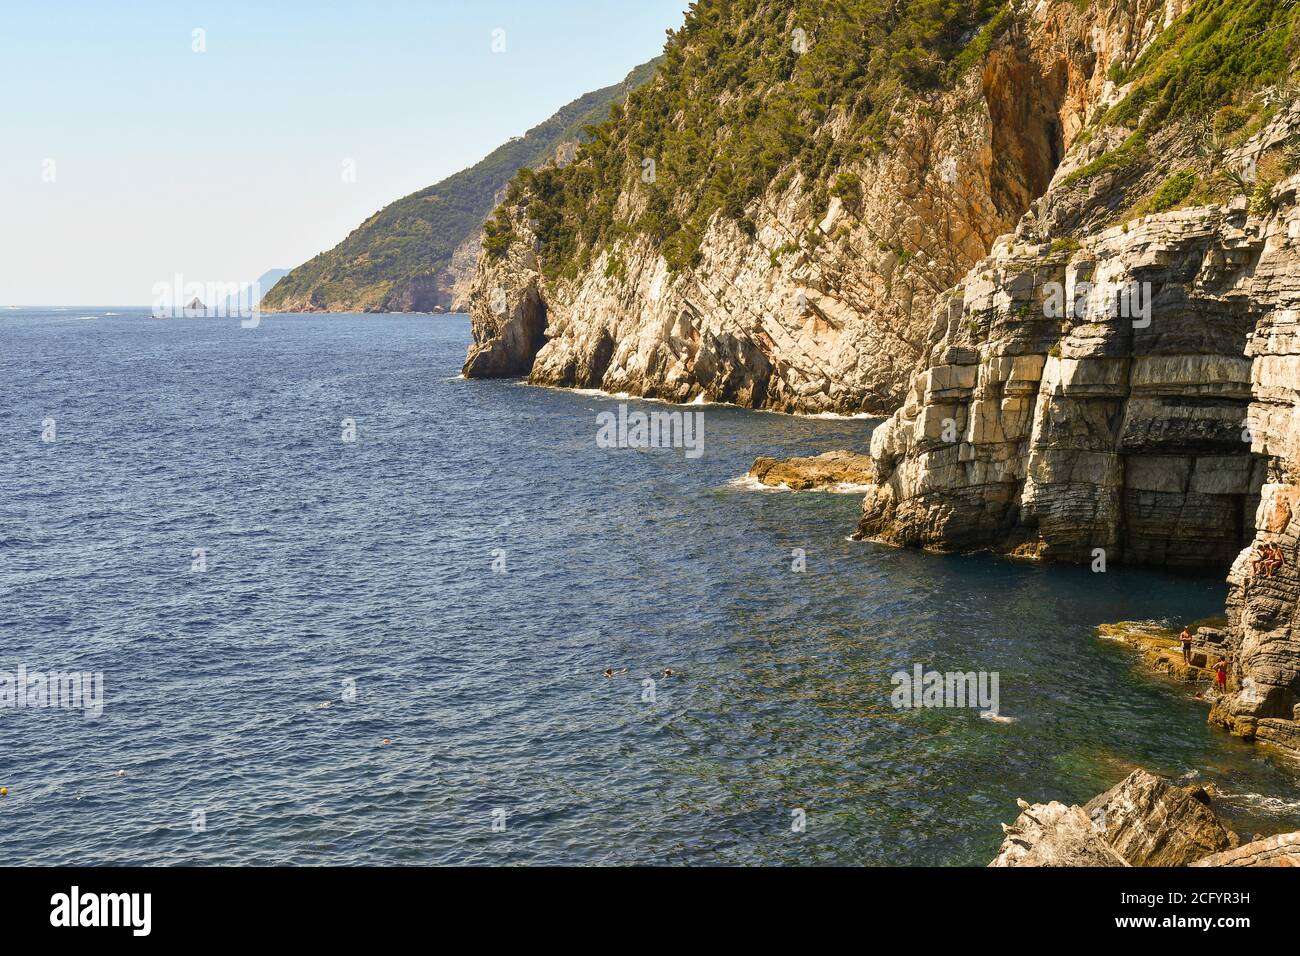 Scenic view of the bay with the Lord Byron's Grotto and people on the rocks in a sunny summer day, Porto Venere, La Spezia, Liguria, Italy Stock Photo